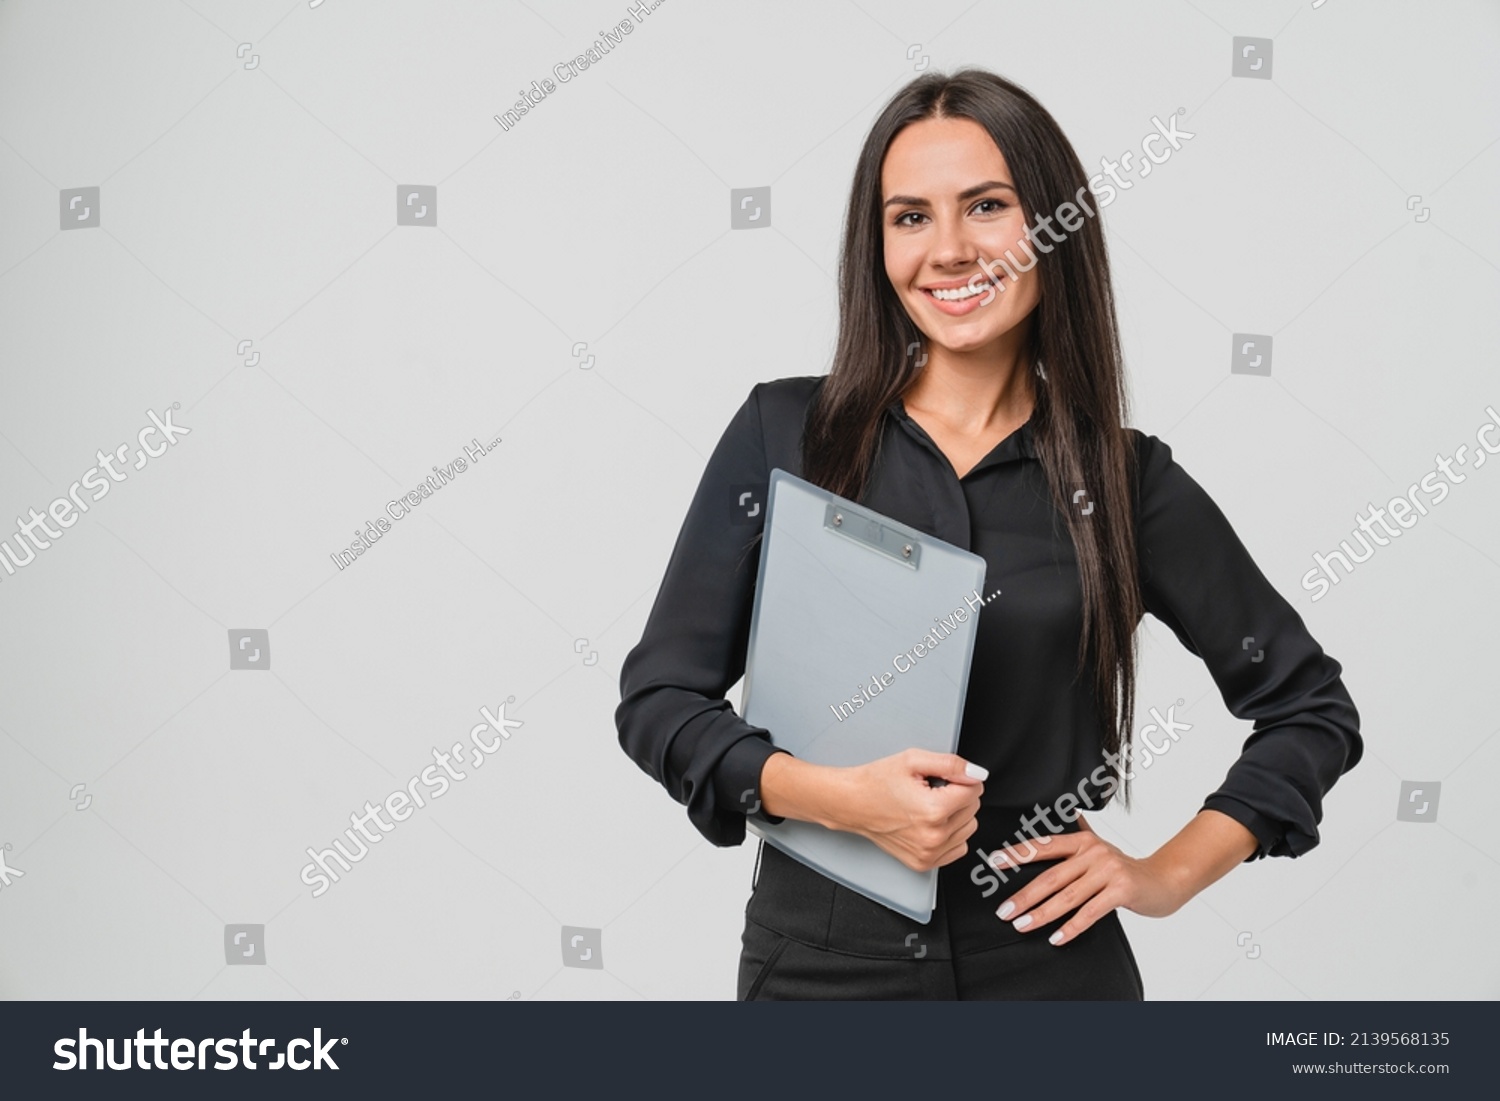 Female young businesswoman auditor inspector examiner controller in formal wear writing on clipboard, checking the quality of goods and service looking at camera isolated in white background #2139568135